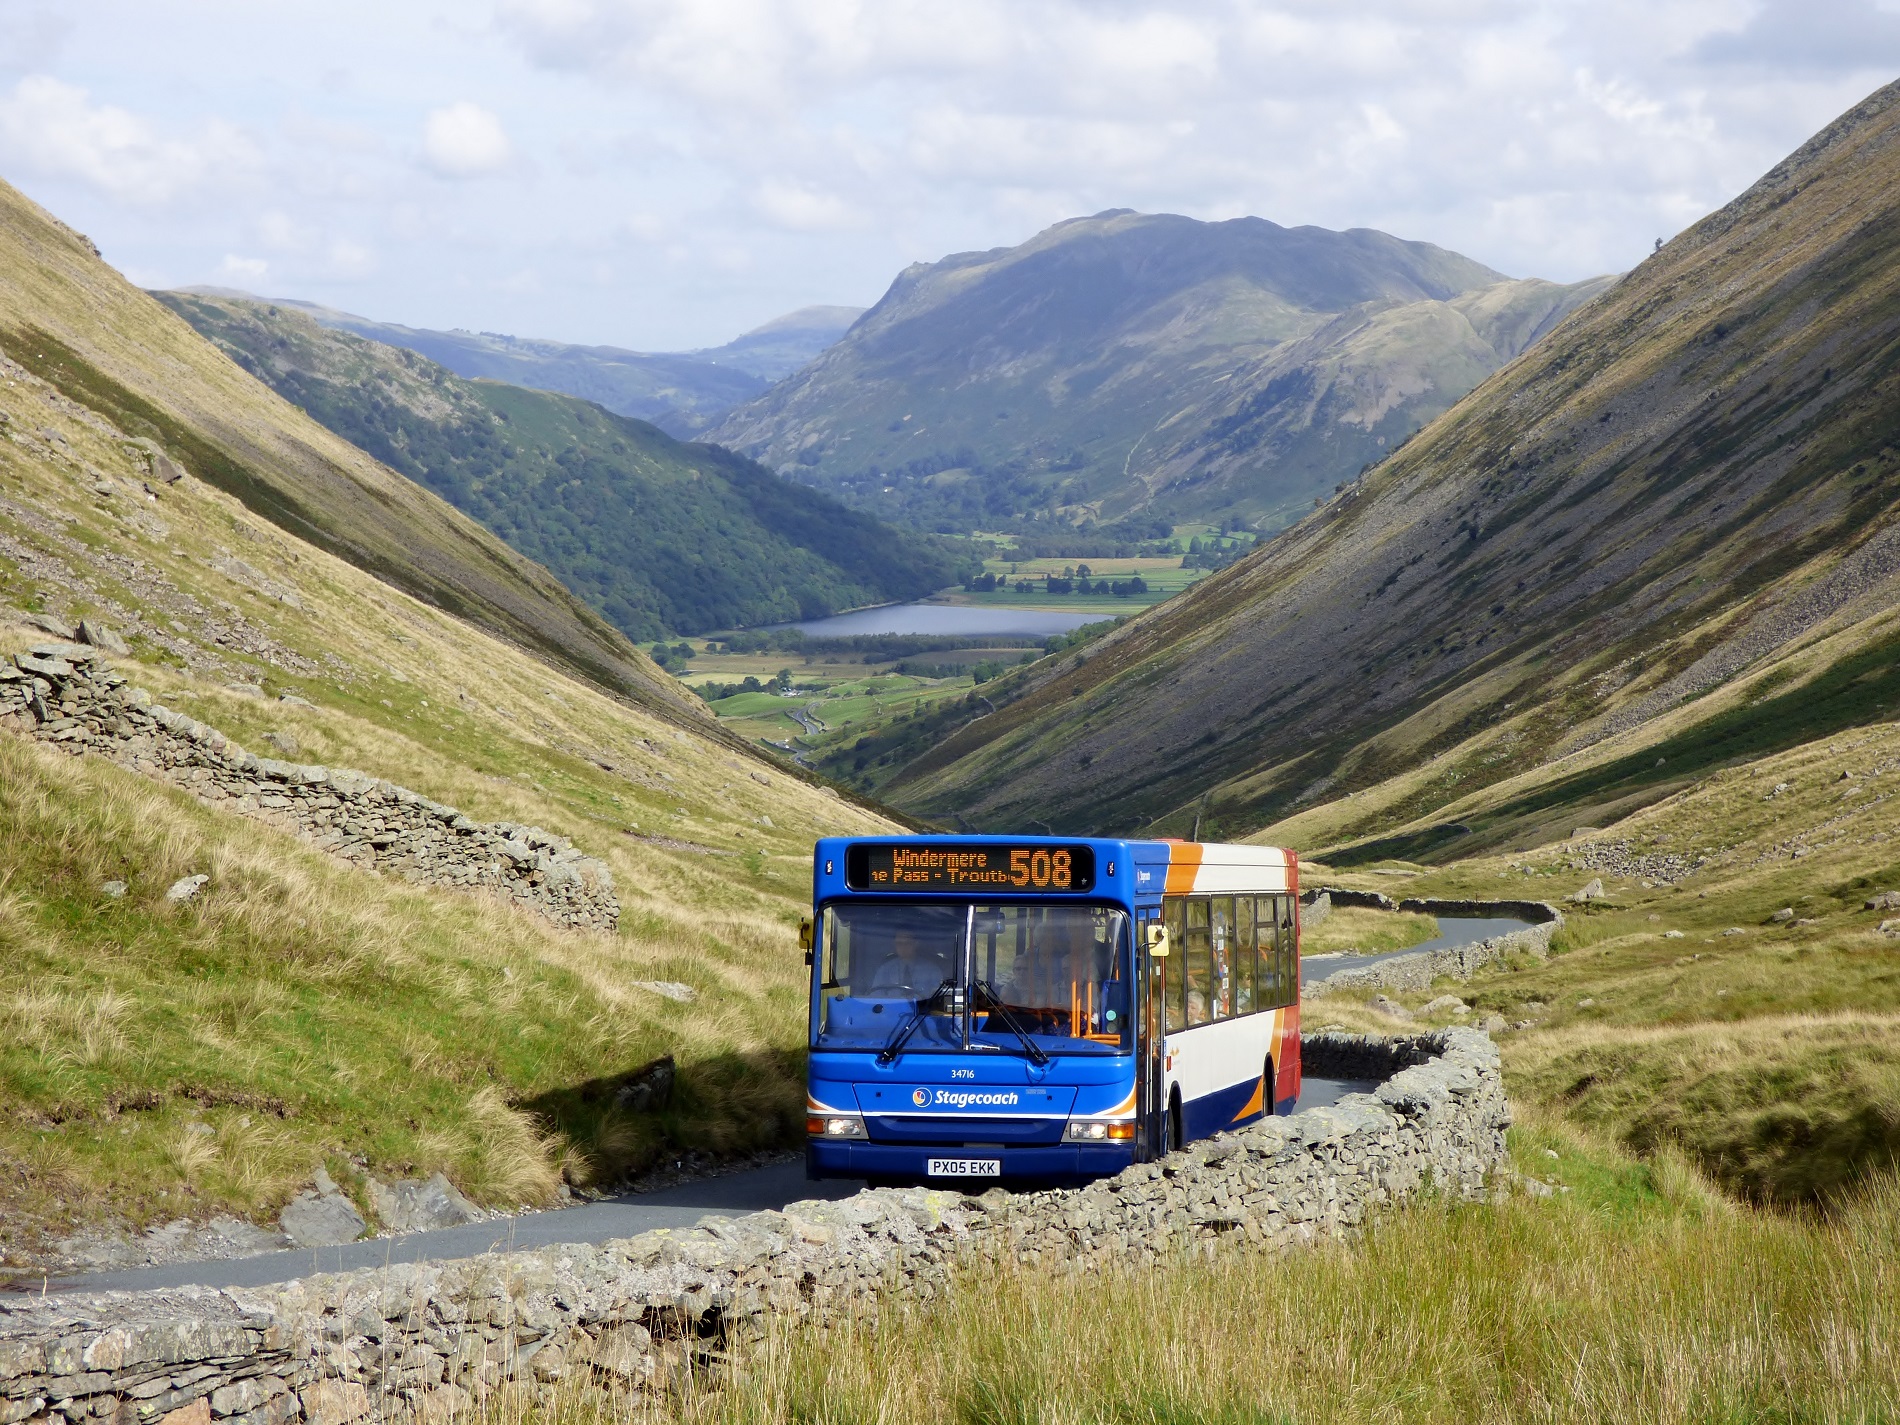 Zak Nelson's picture of a Stagecoach bus steaming up the valley came close to winning